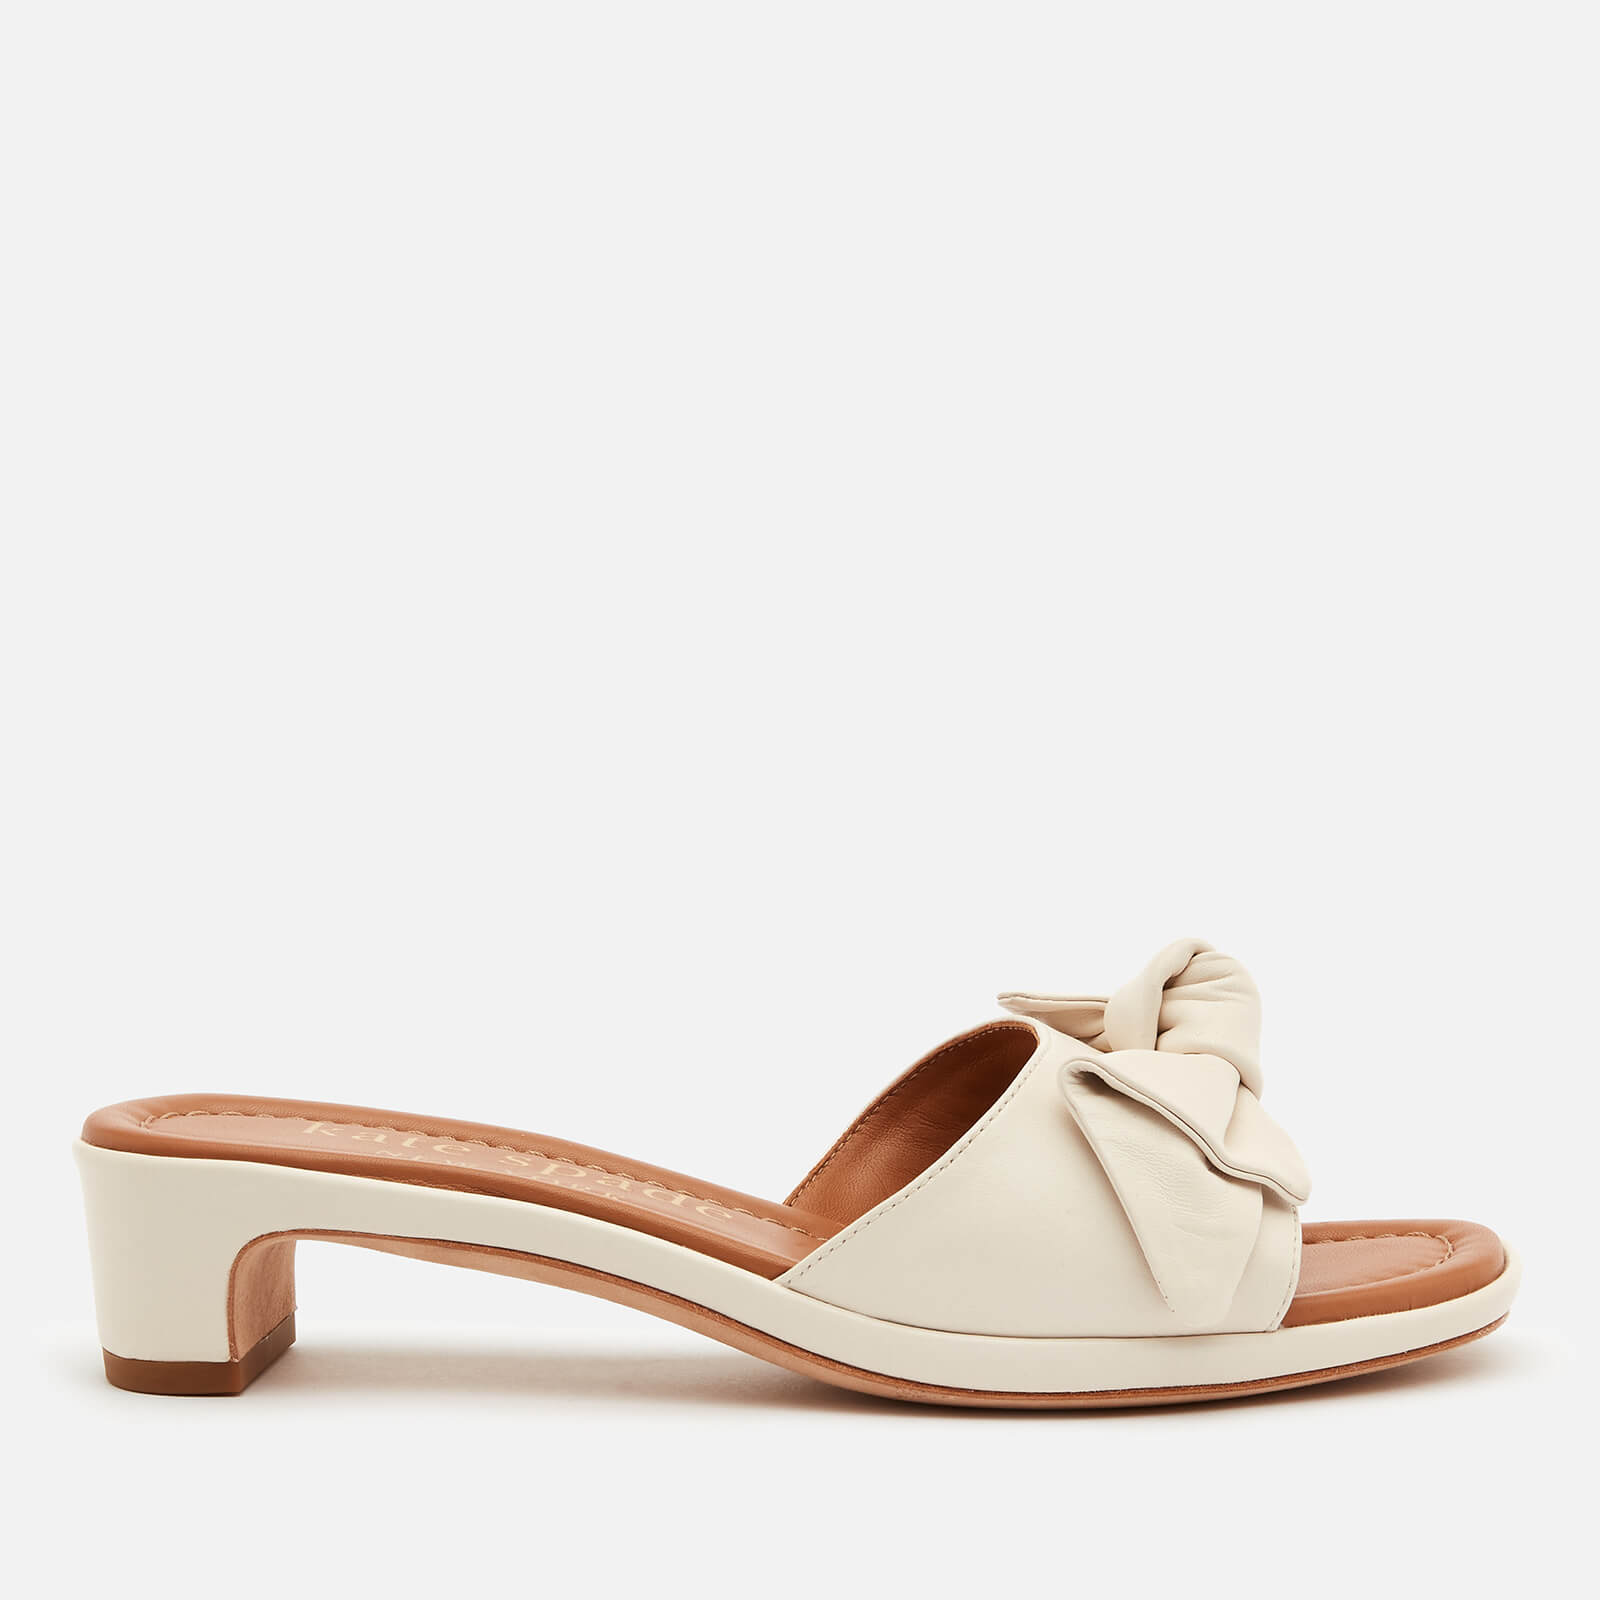 Kate Spade New York Women's Lilah Leather Heeled Mules - Parchment - UK 4